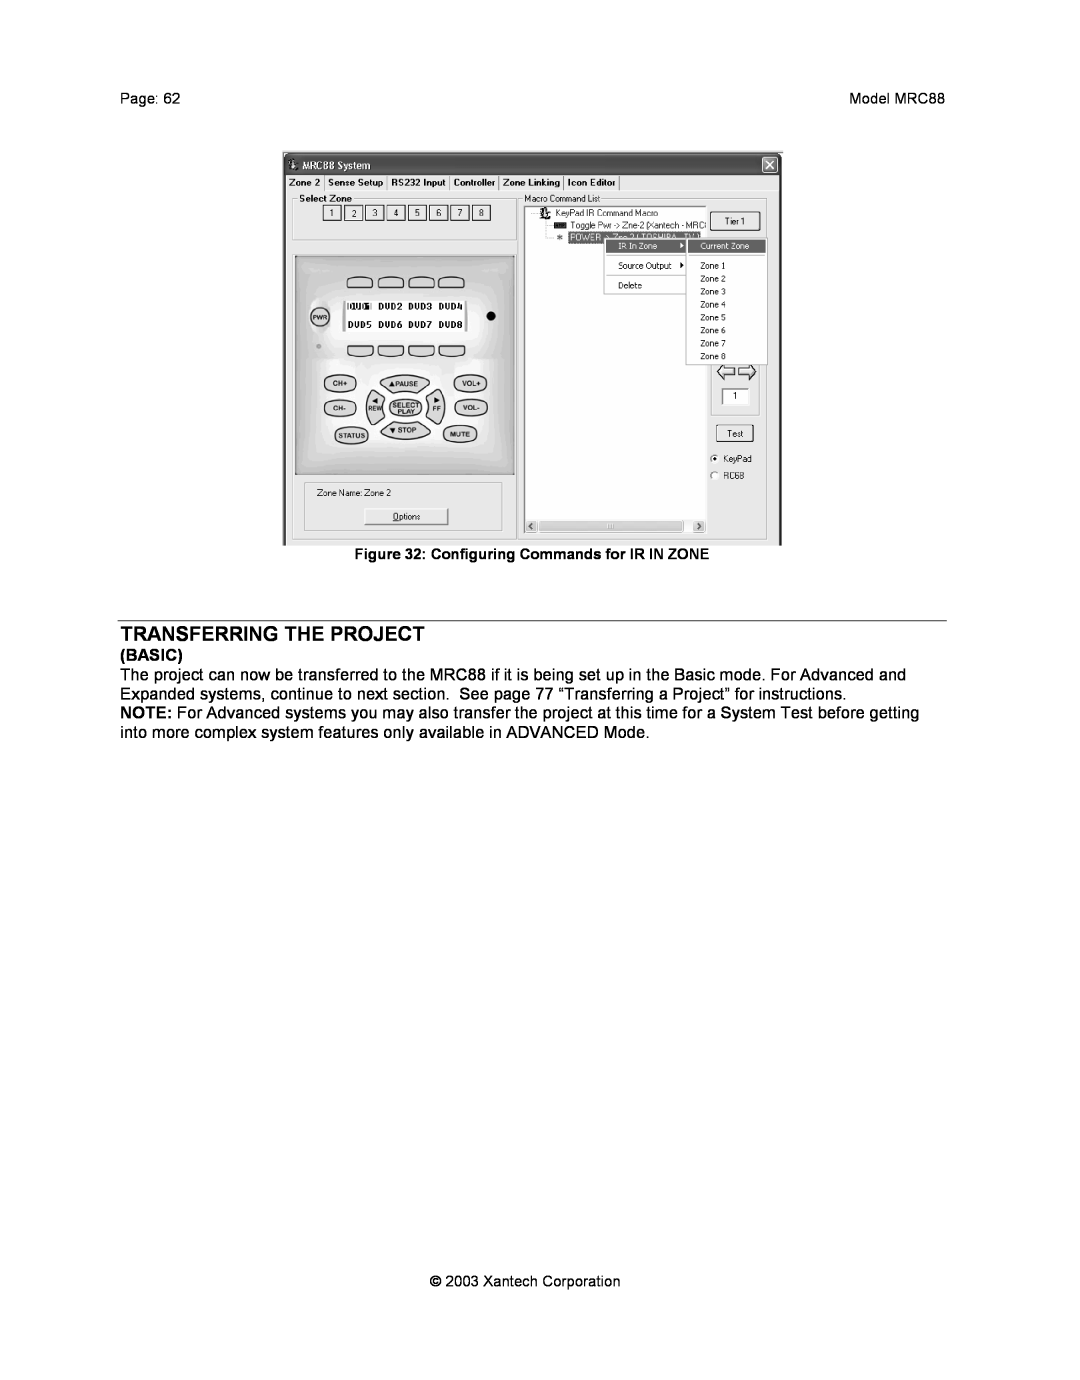 Xantech mrc88 installation instructions Transferring The Project, Basic, Configuring Commands for IR IN ZONE 